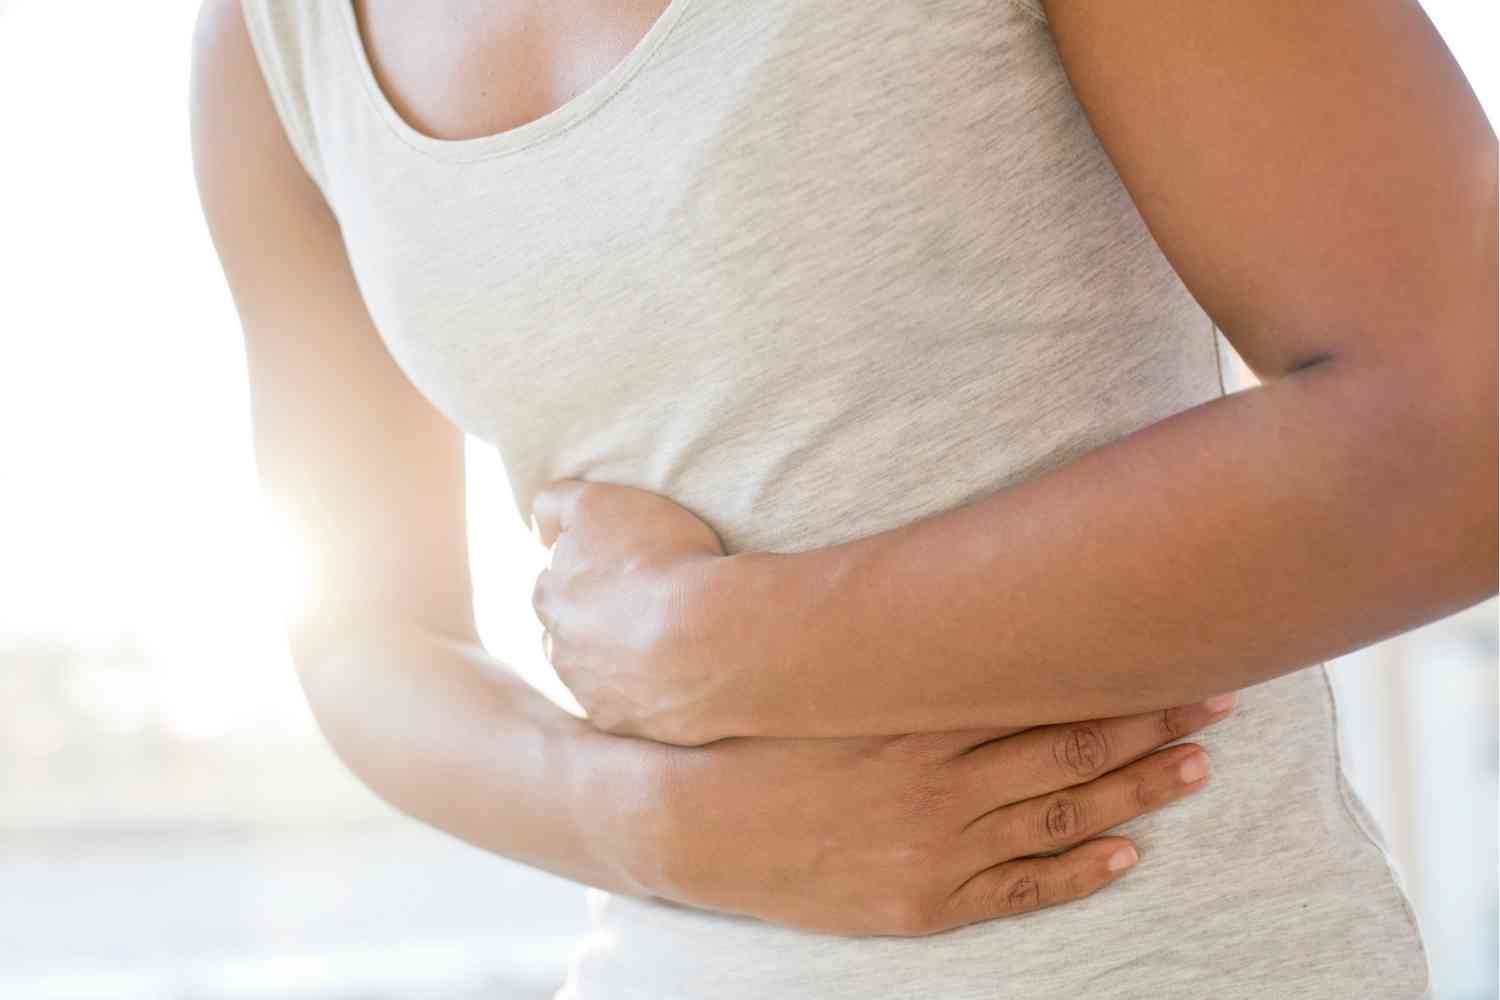 What are the Warning Signs of Irritable Bowel Syndrome (IBS)?